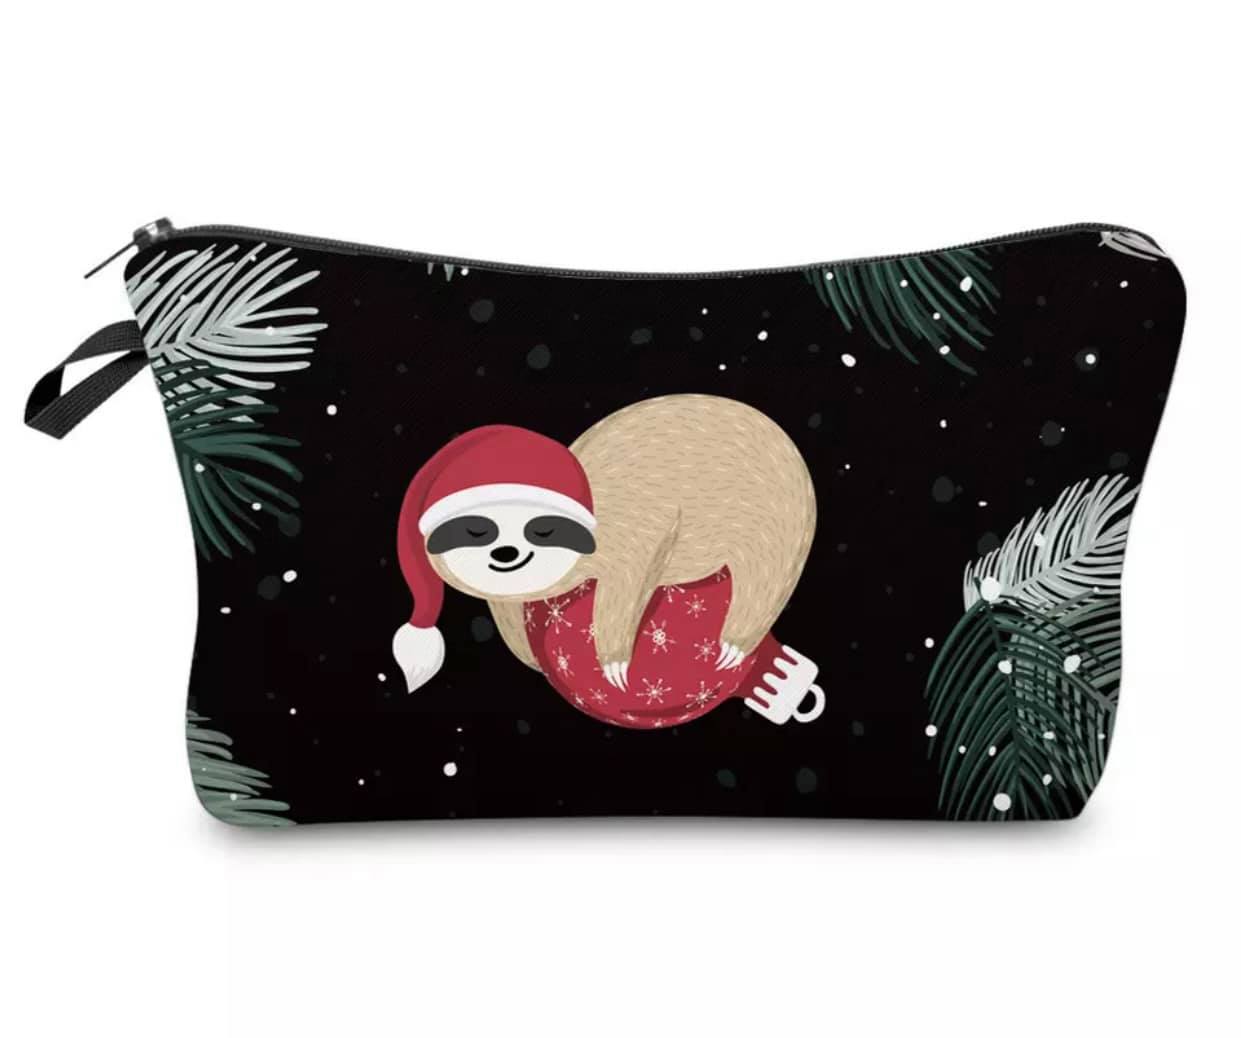 Sloth on an Ornament Pouch